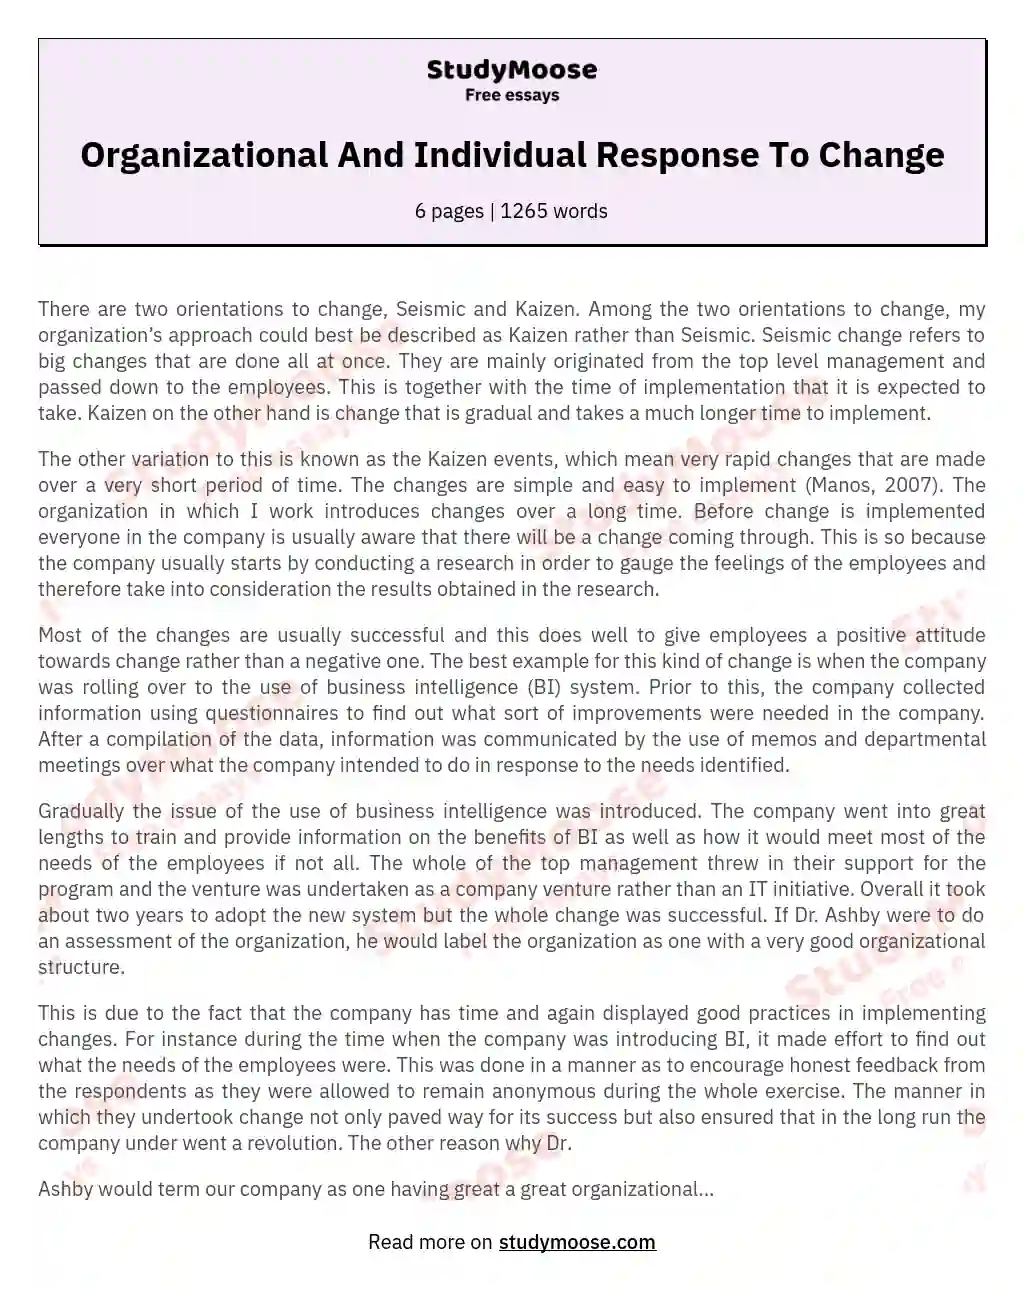 Organizational And Individual Response To Change essay